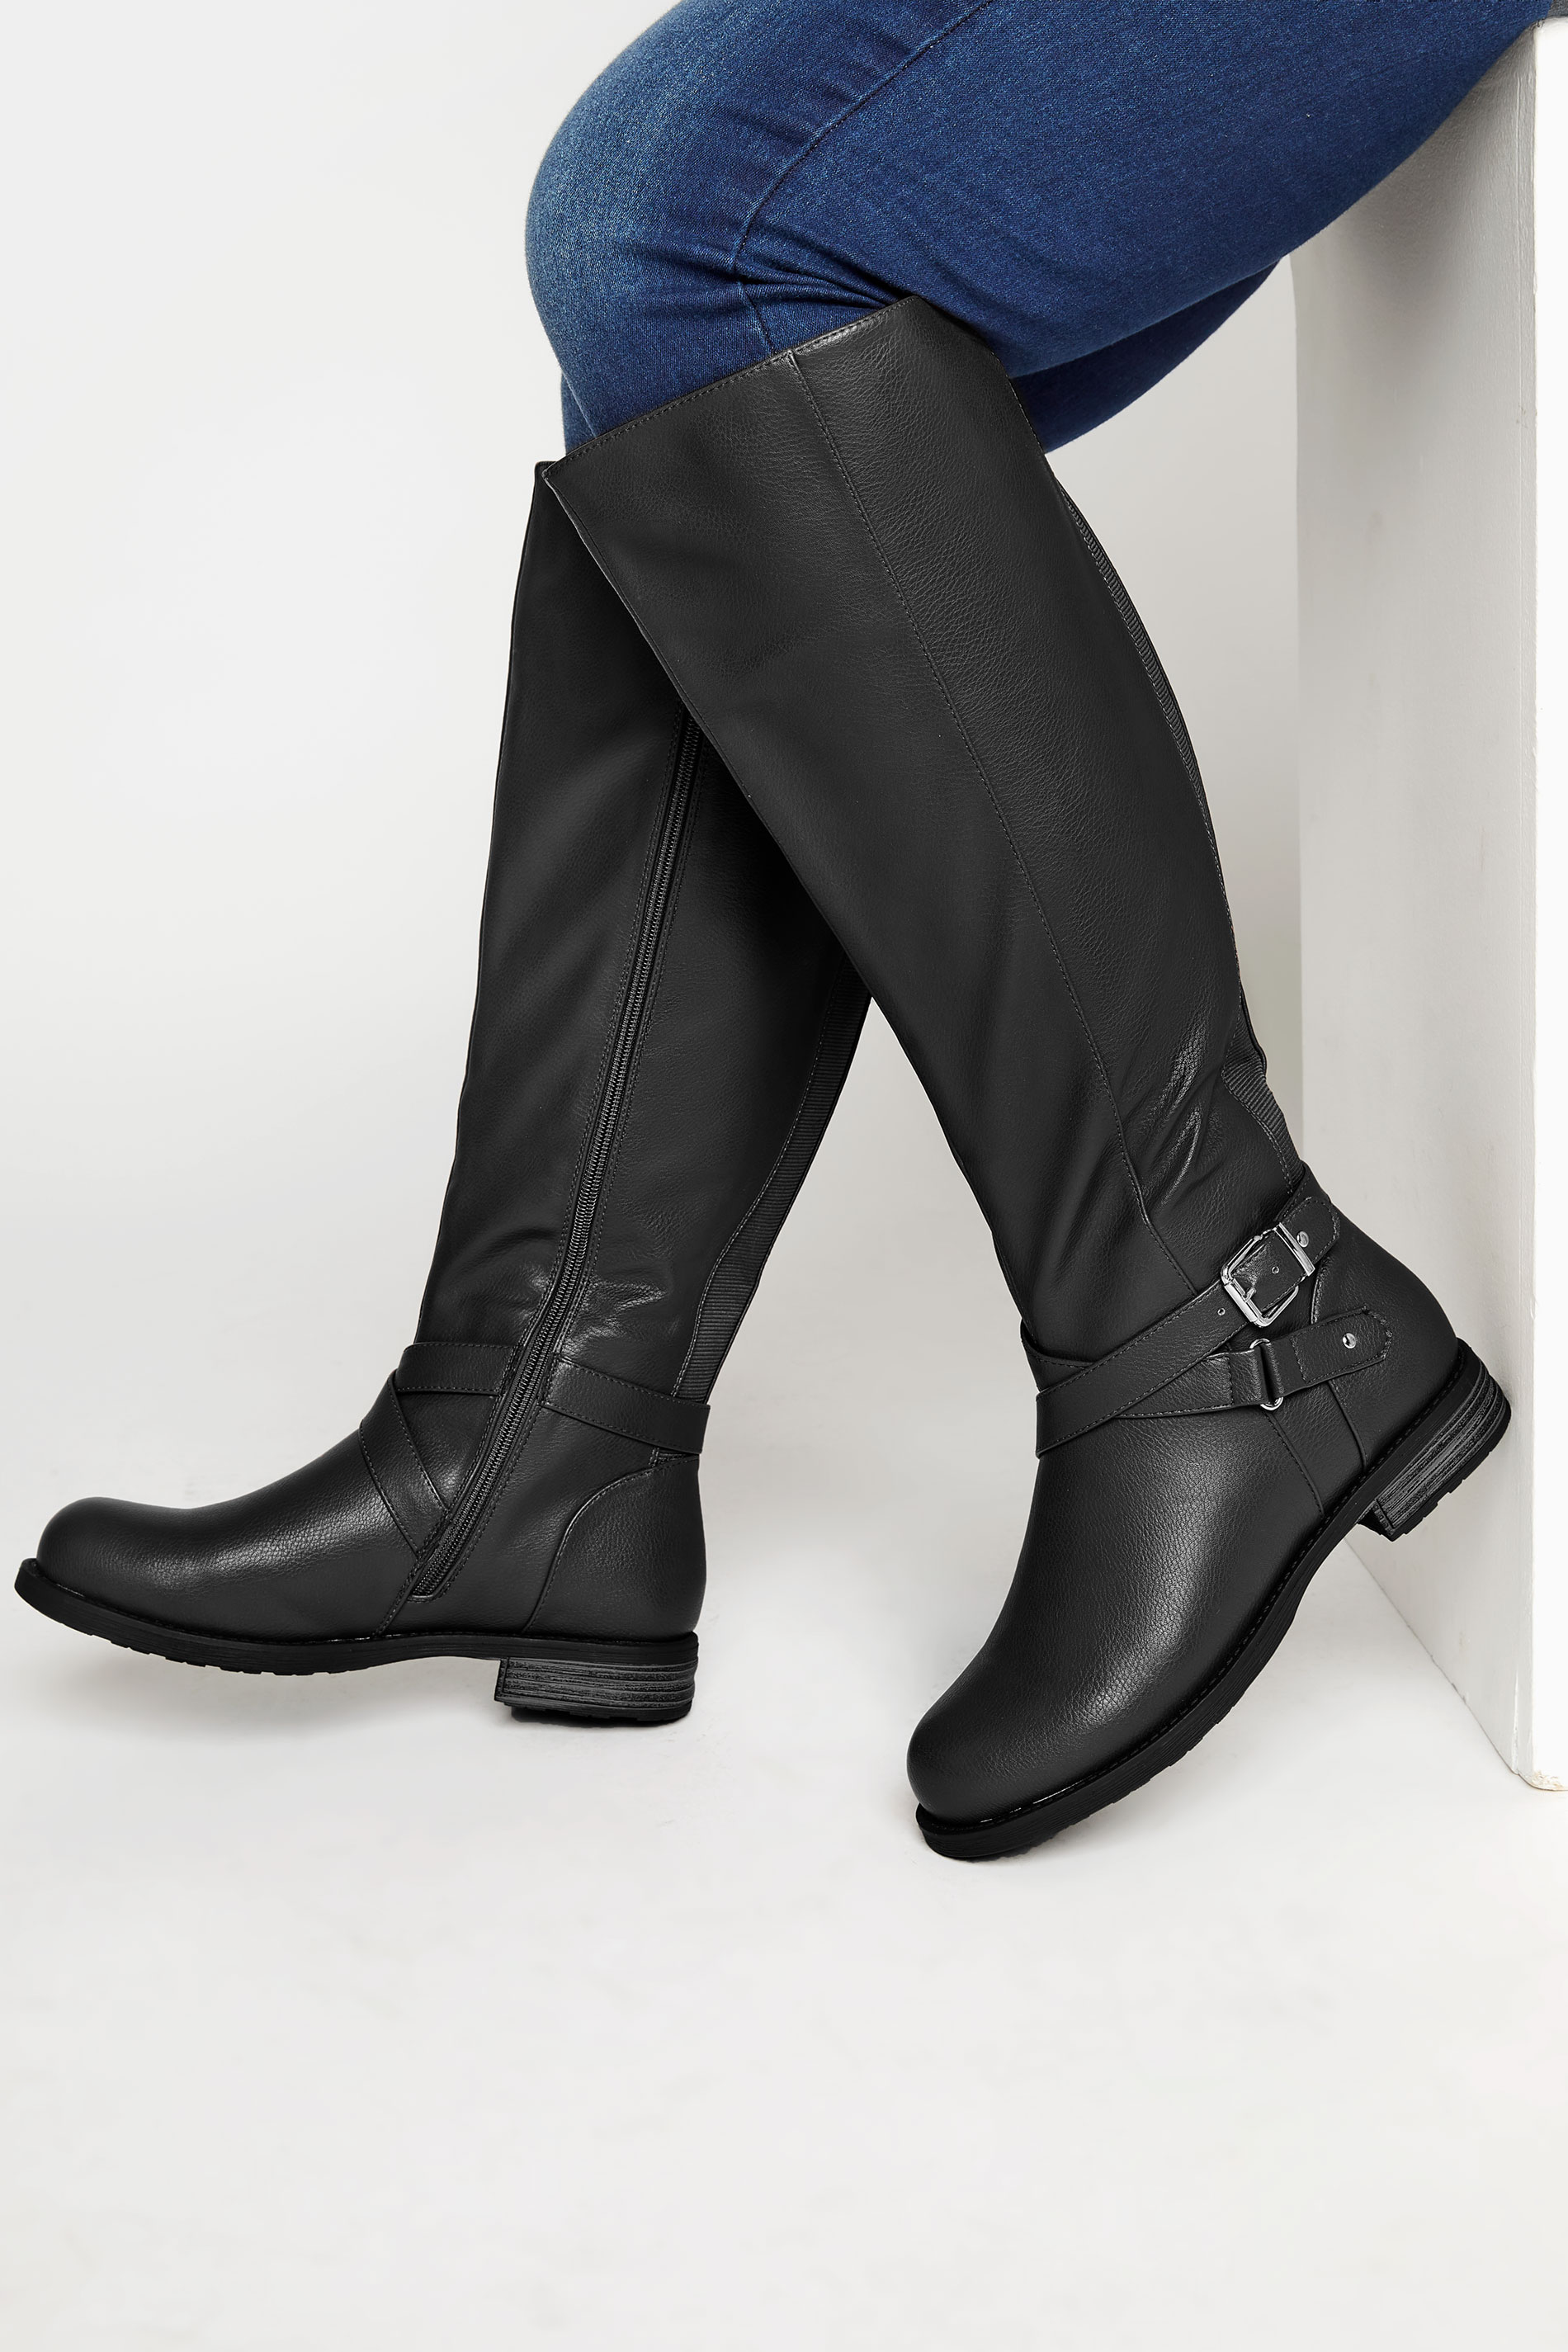 Black Faux Leather Knee High Boots In Wide E Fit & Extra Wide EE Fit | Yours Clothing 1